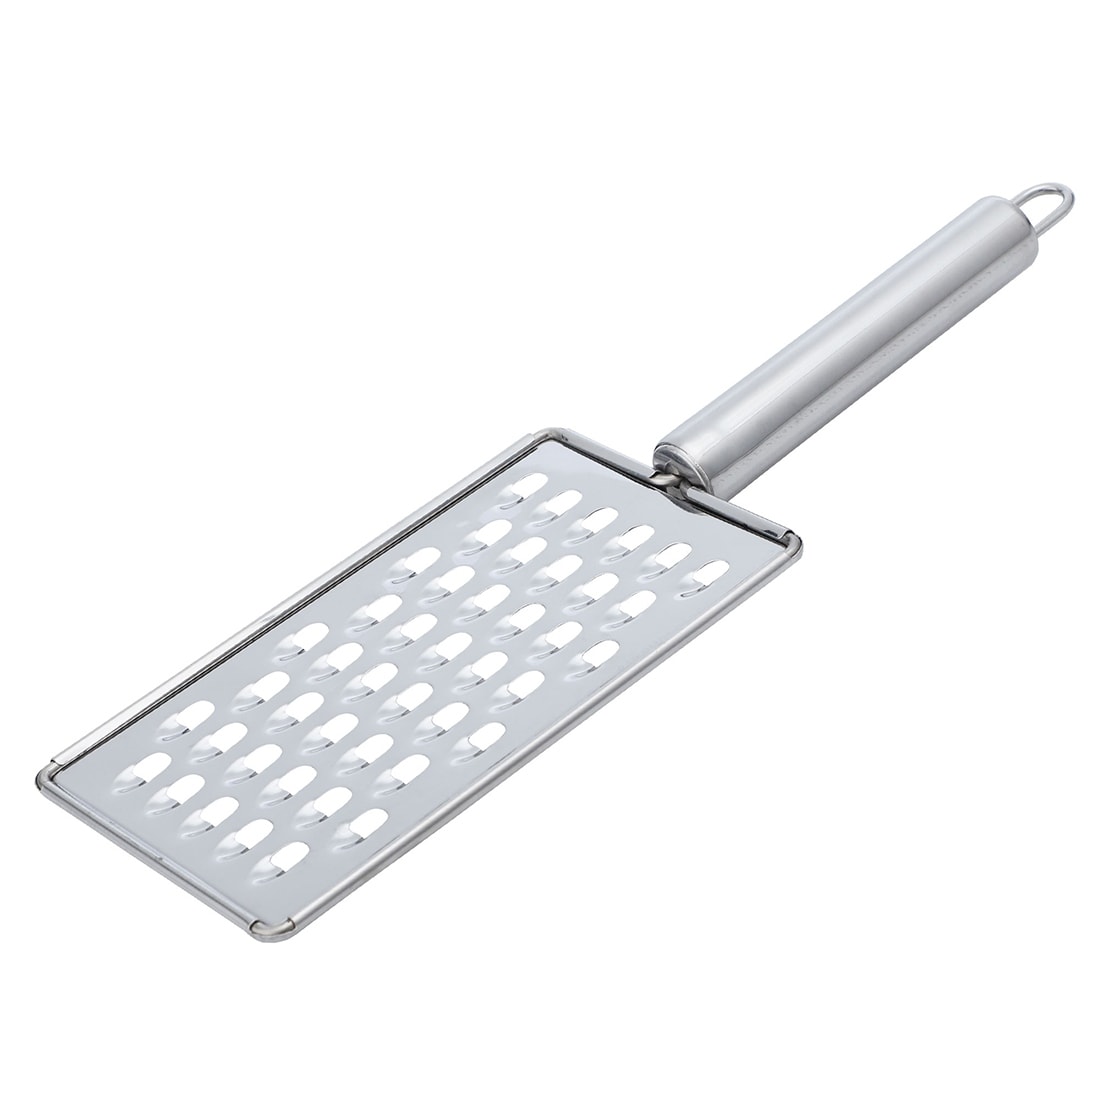 https://ak1.ostkcdn.com/images/products/is/images/direct/d893f199c3aedf72bda76c37591a6491241c9fb9/Stainless-Steel-Cheese-Grater-Fruit-Vegetable-Grater-for-Restaurant.jpg